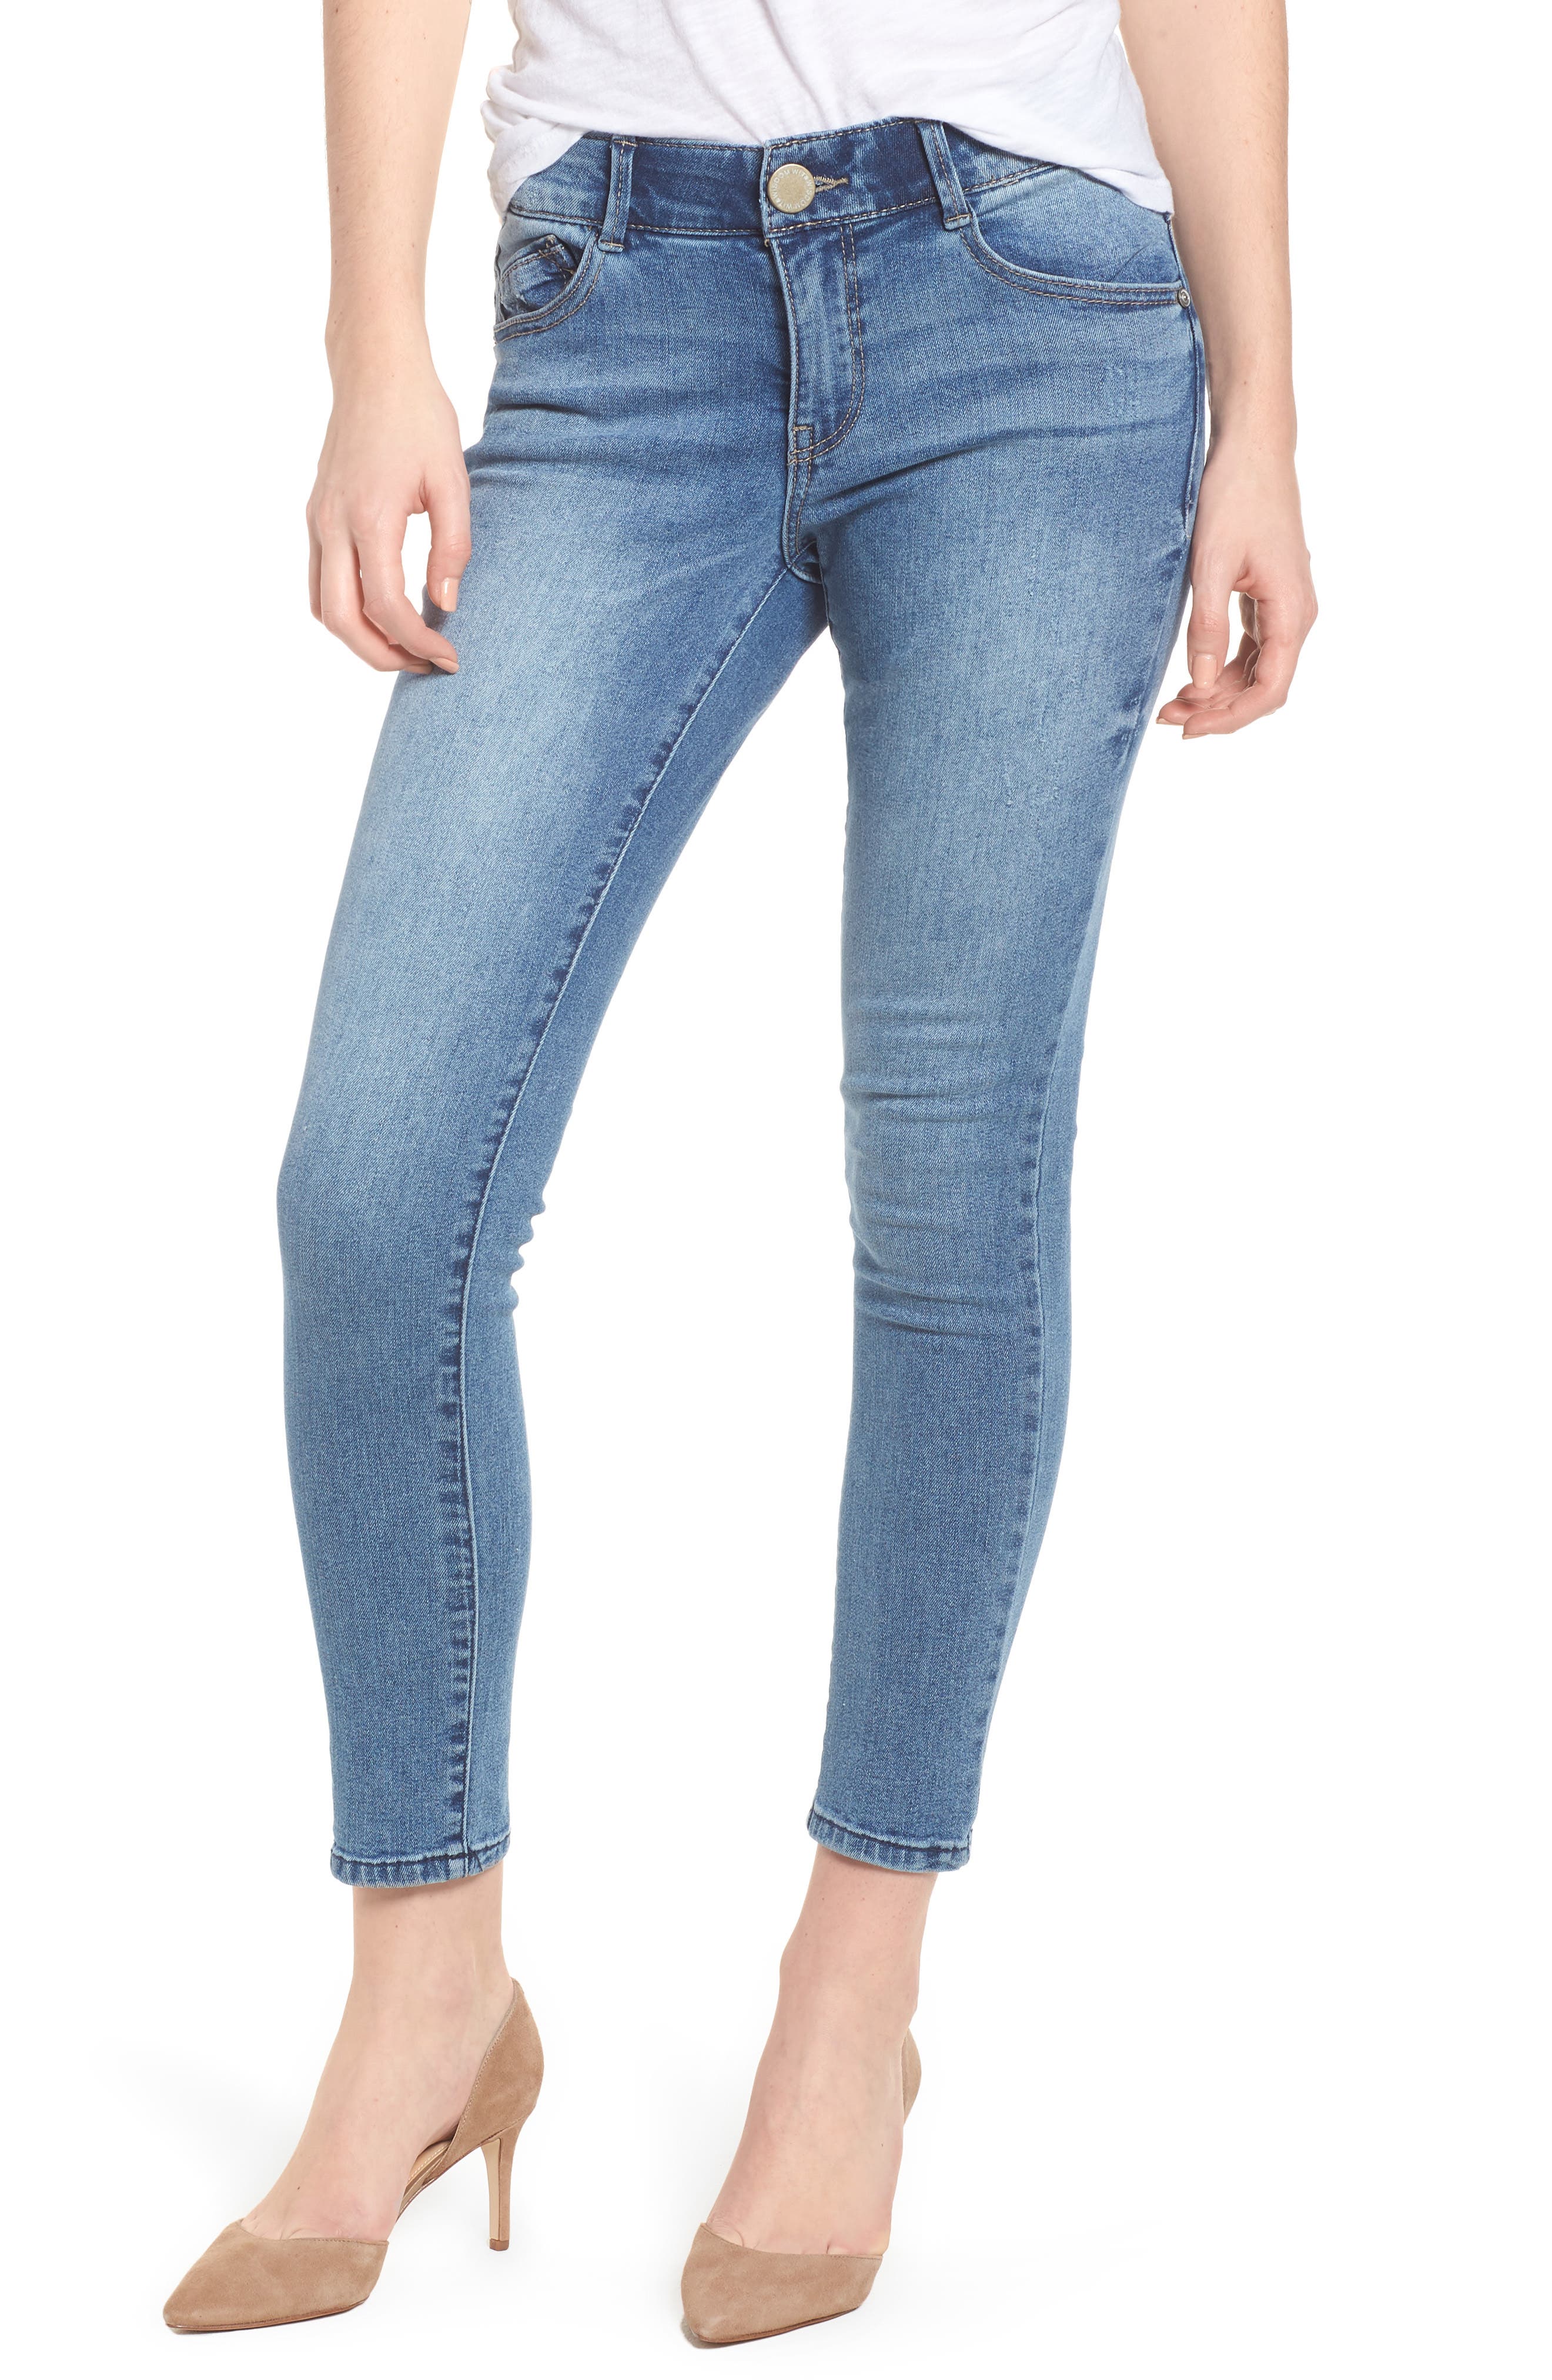 ankle skimming jeans